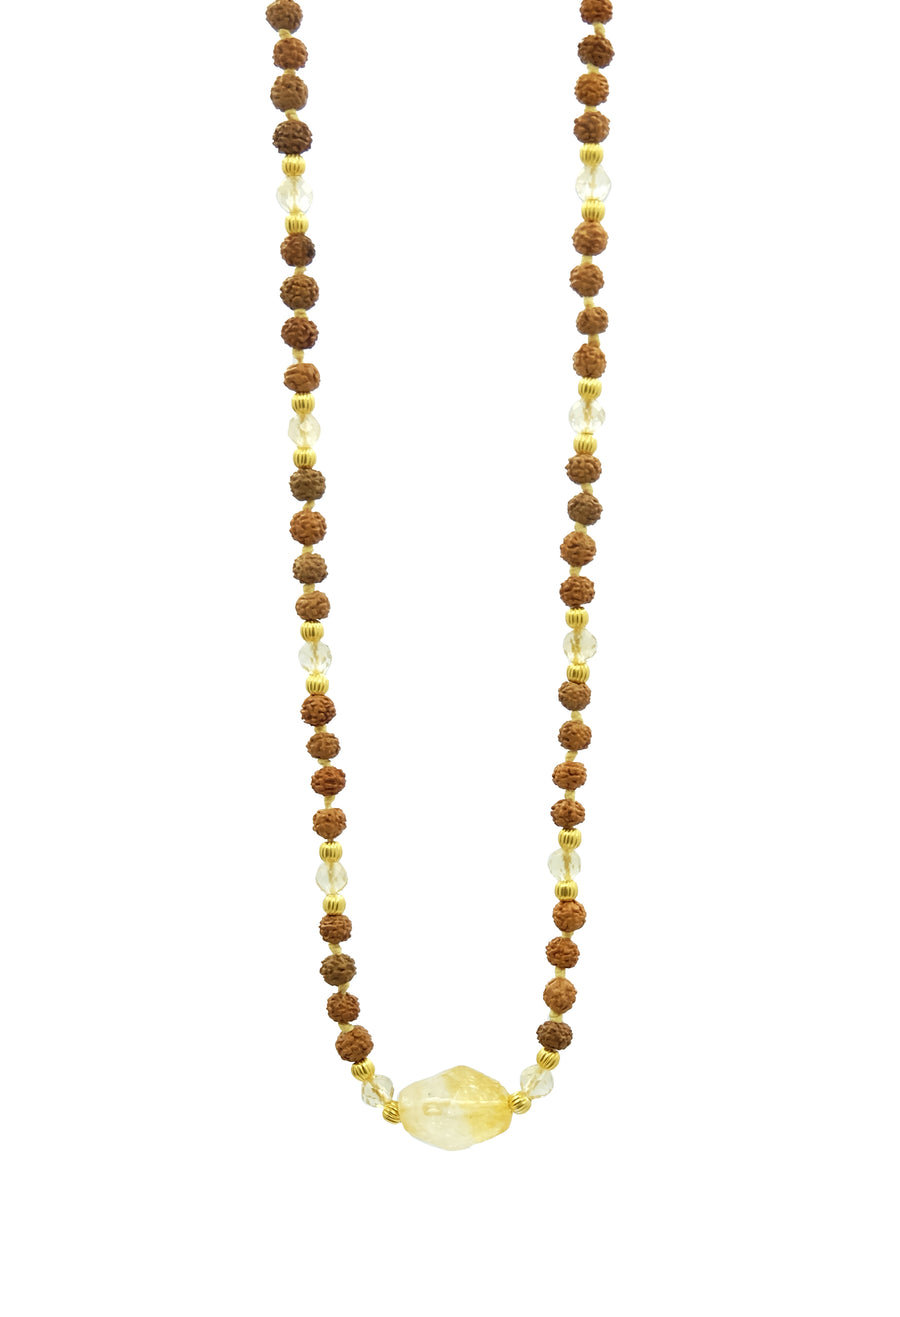 Golden Aura choker length necklace is hand-made from rudraksha seeds, citrine and 22k gold accents. 